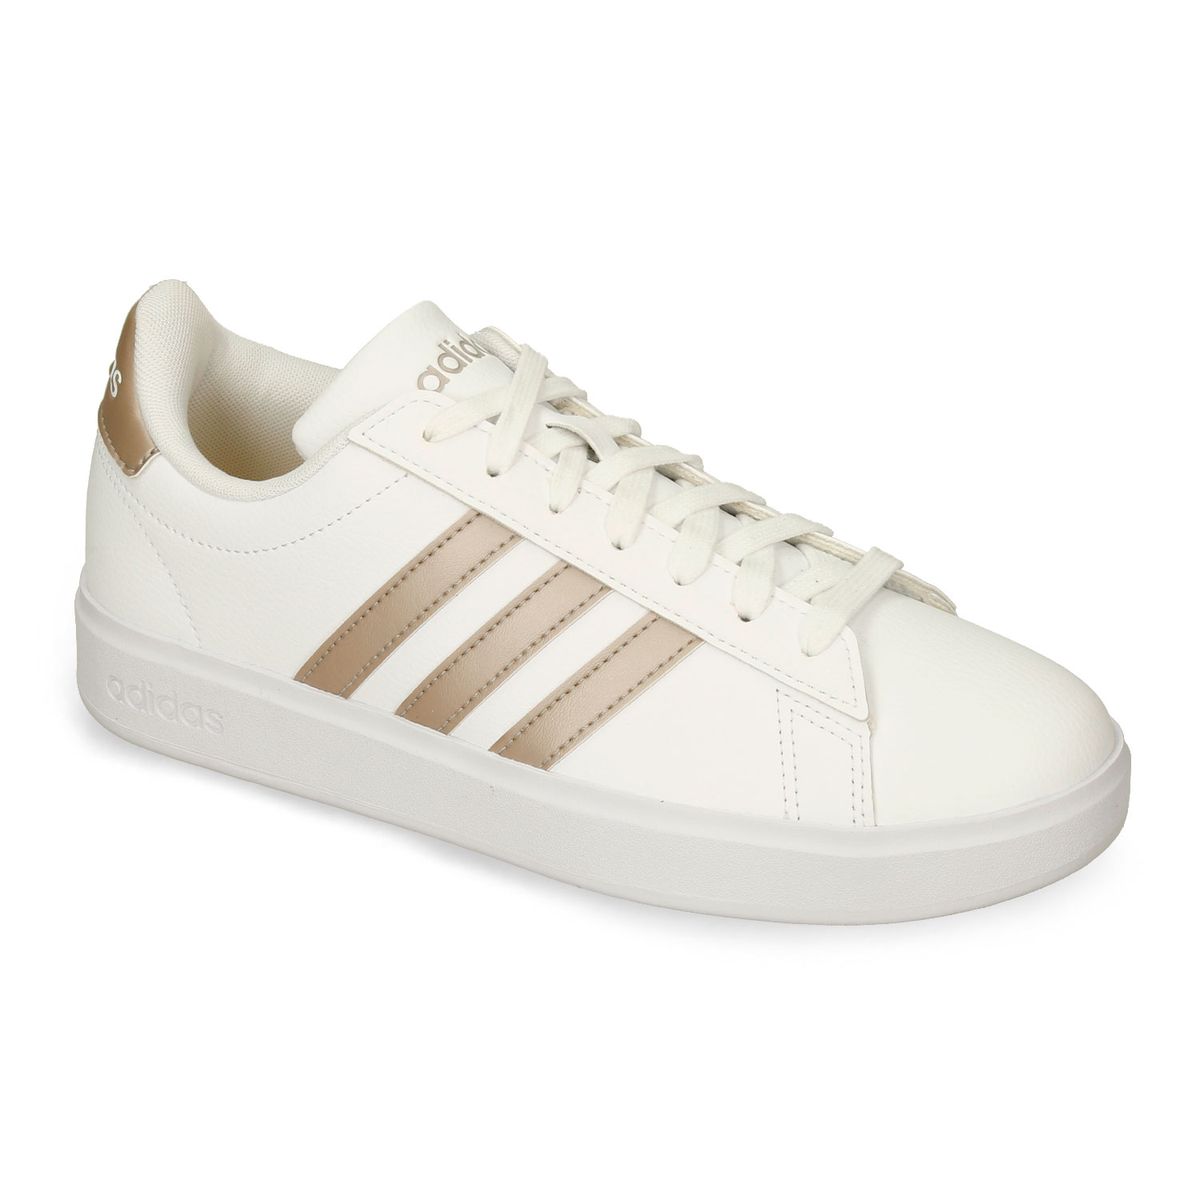 Tenis Casuales Blanco Adidas Grand Court 2.0 Mujer